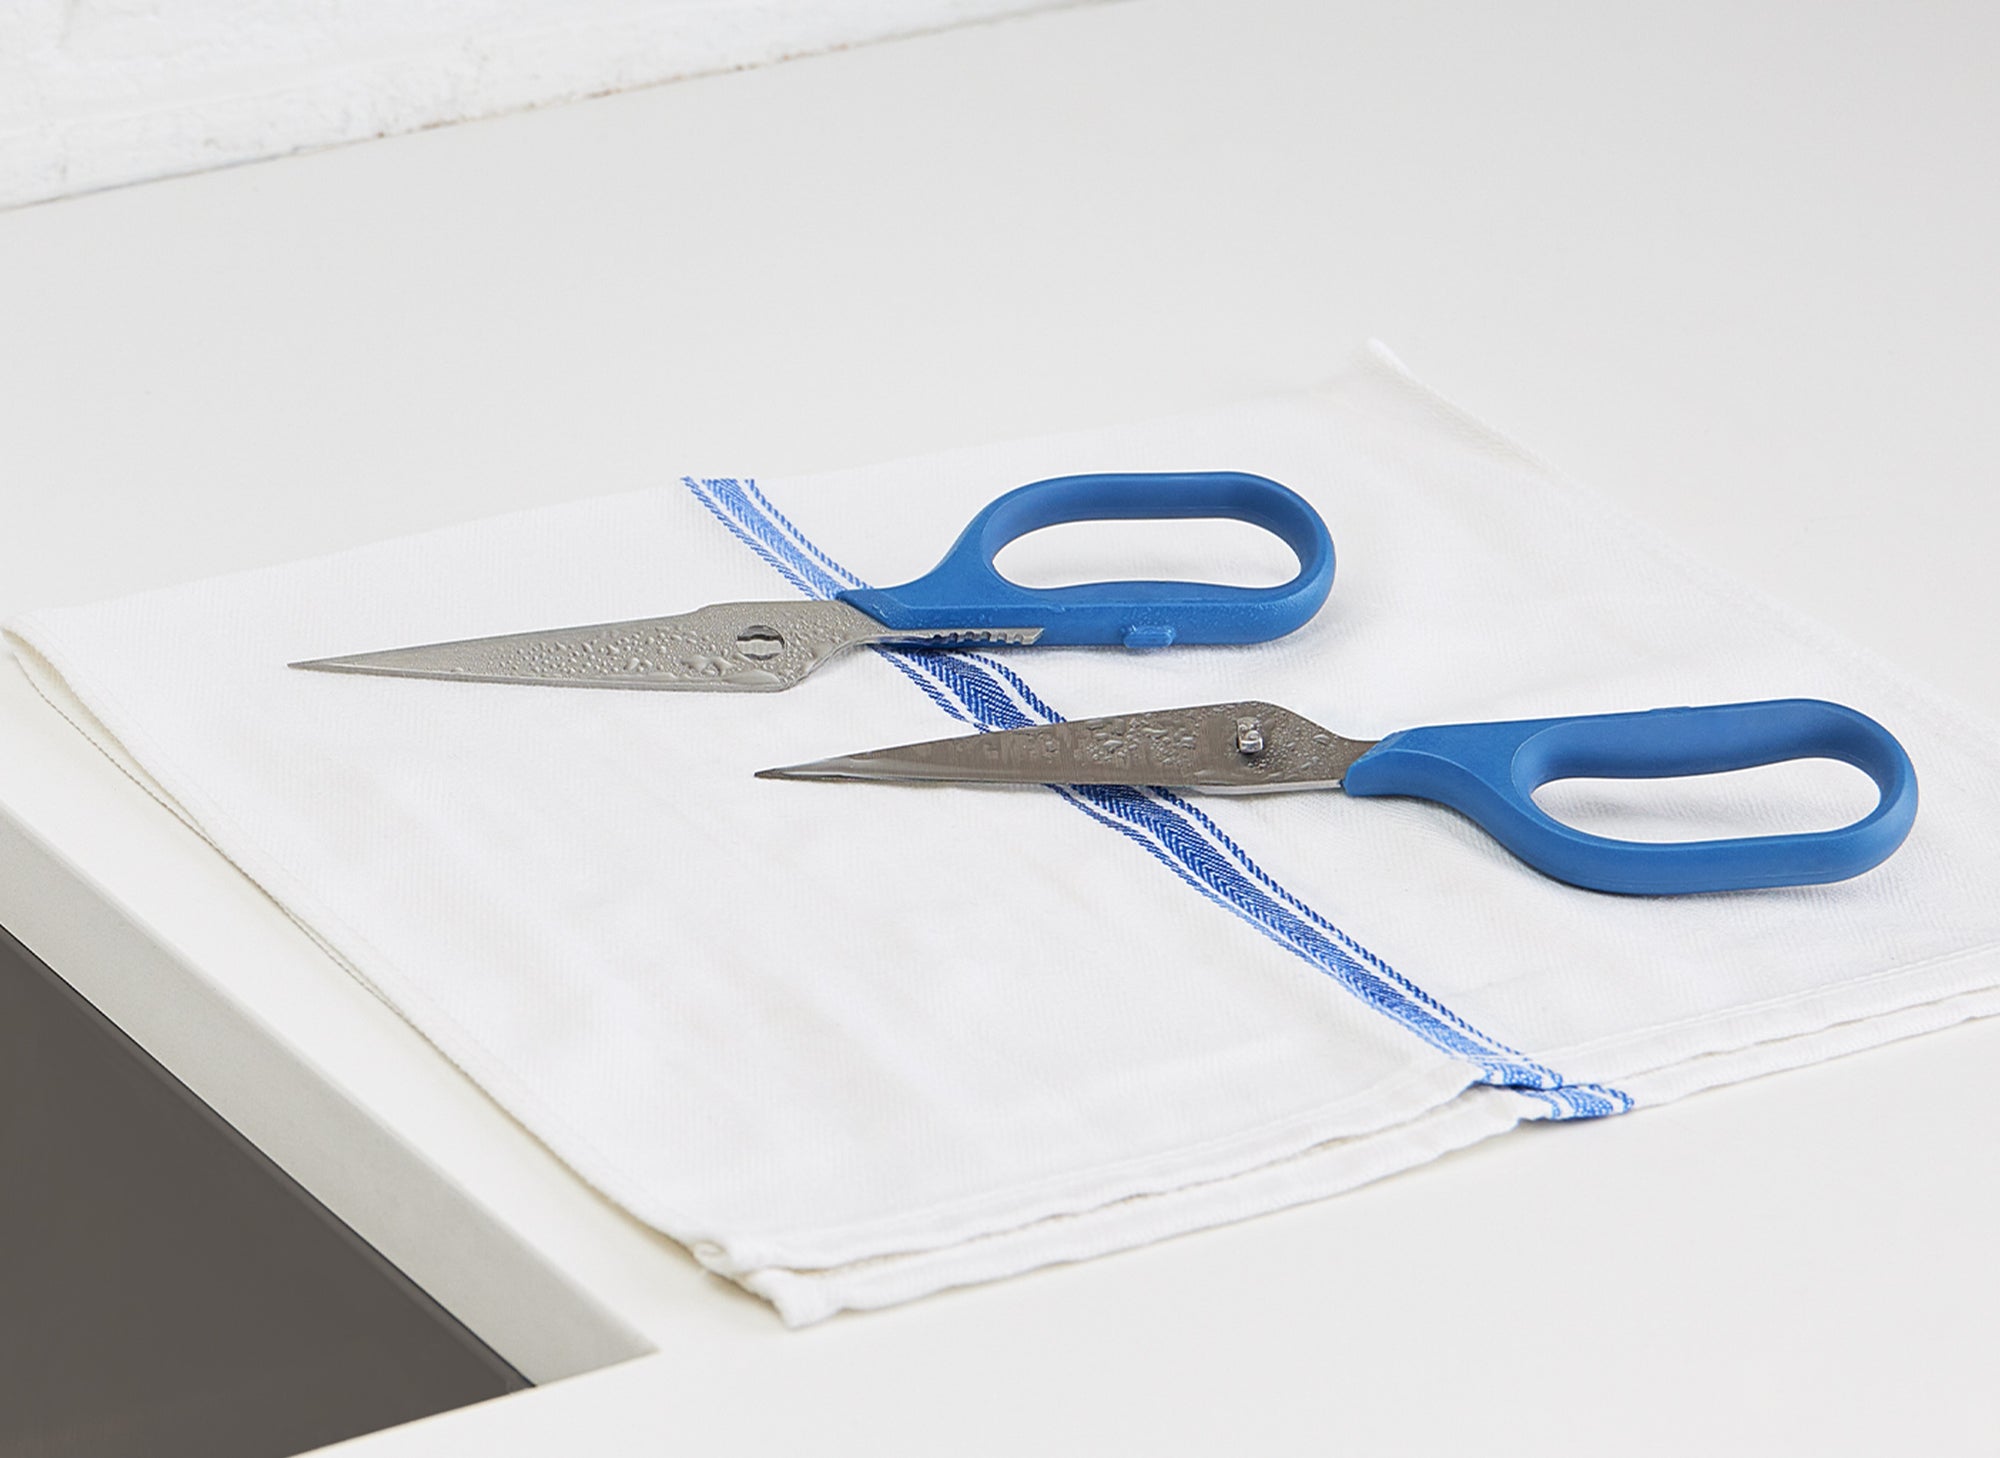 {{blue,black,gray,green,red}} Detached halves of Blue Misen Kitchen Shears drying on a kitchen towel.